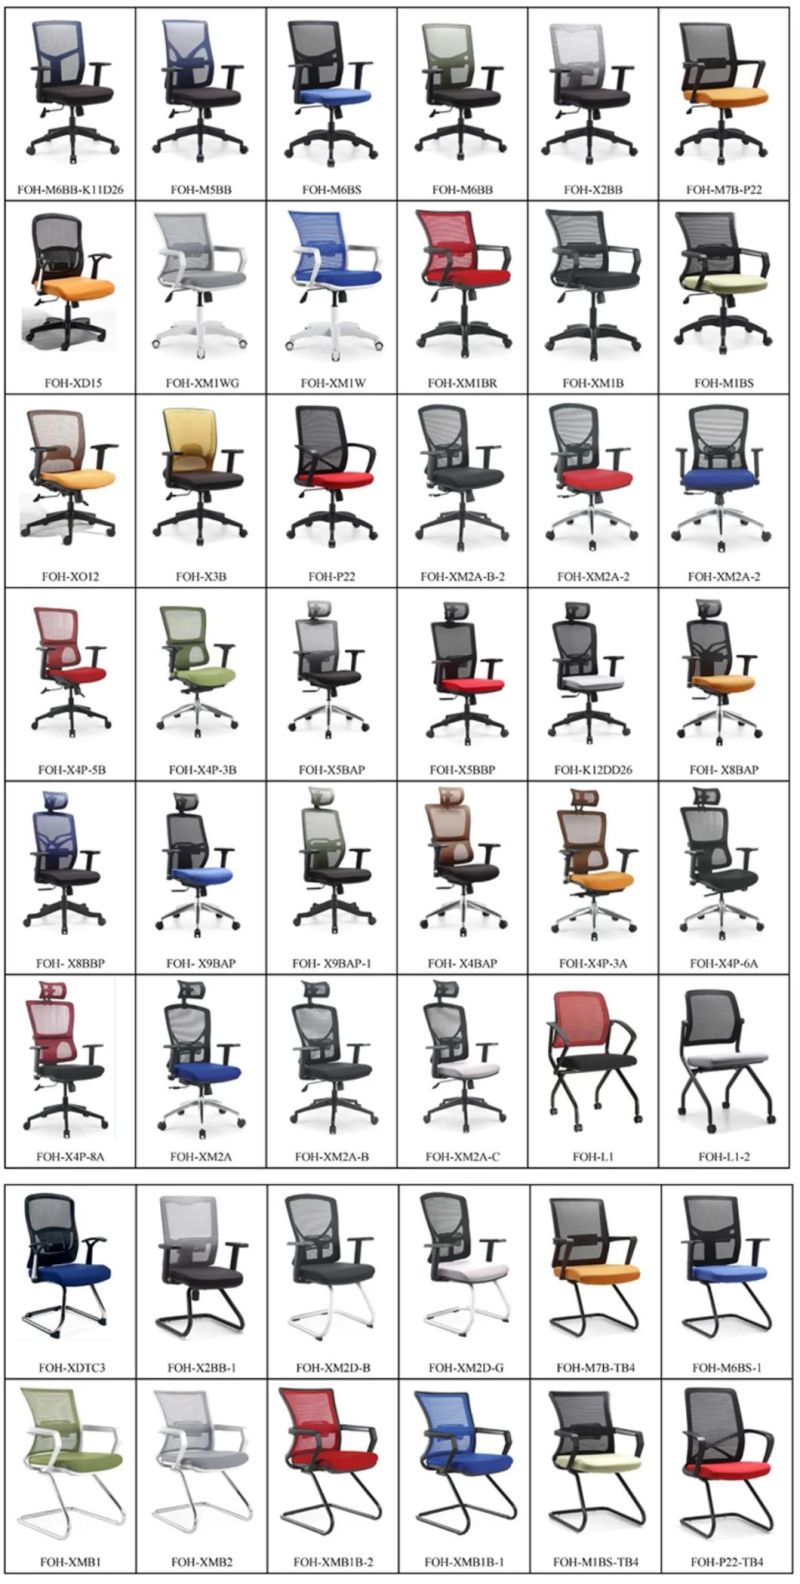 Top Quality Modern Office Furniture Colorful Mesh Office Chair (FOH-XM1W-1)